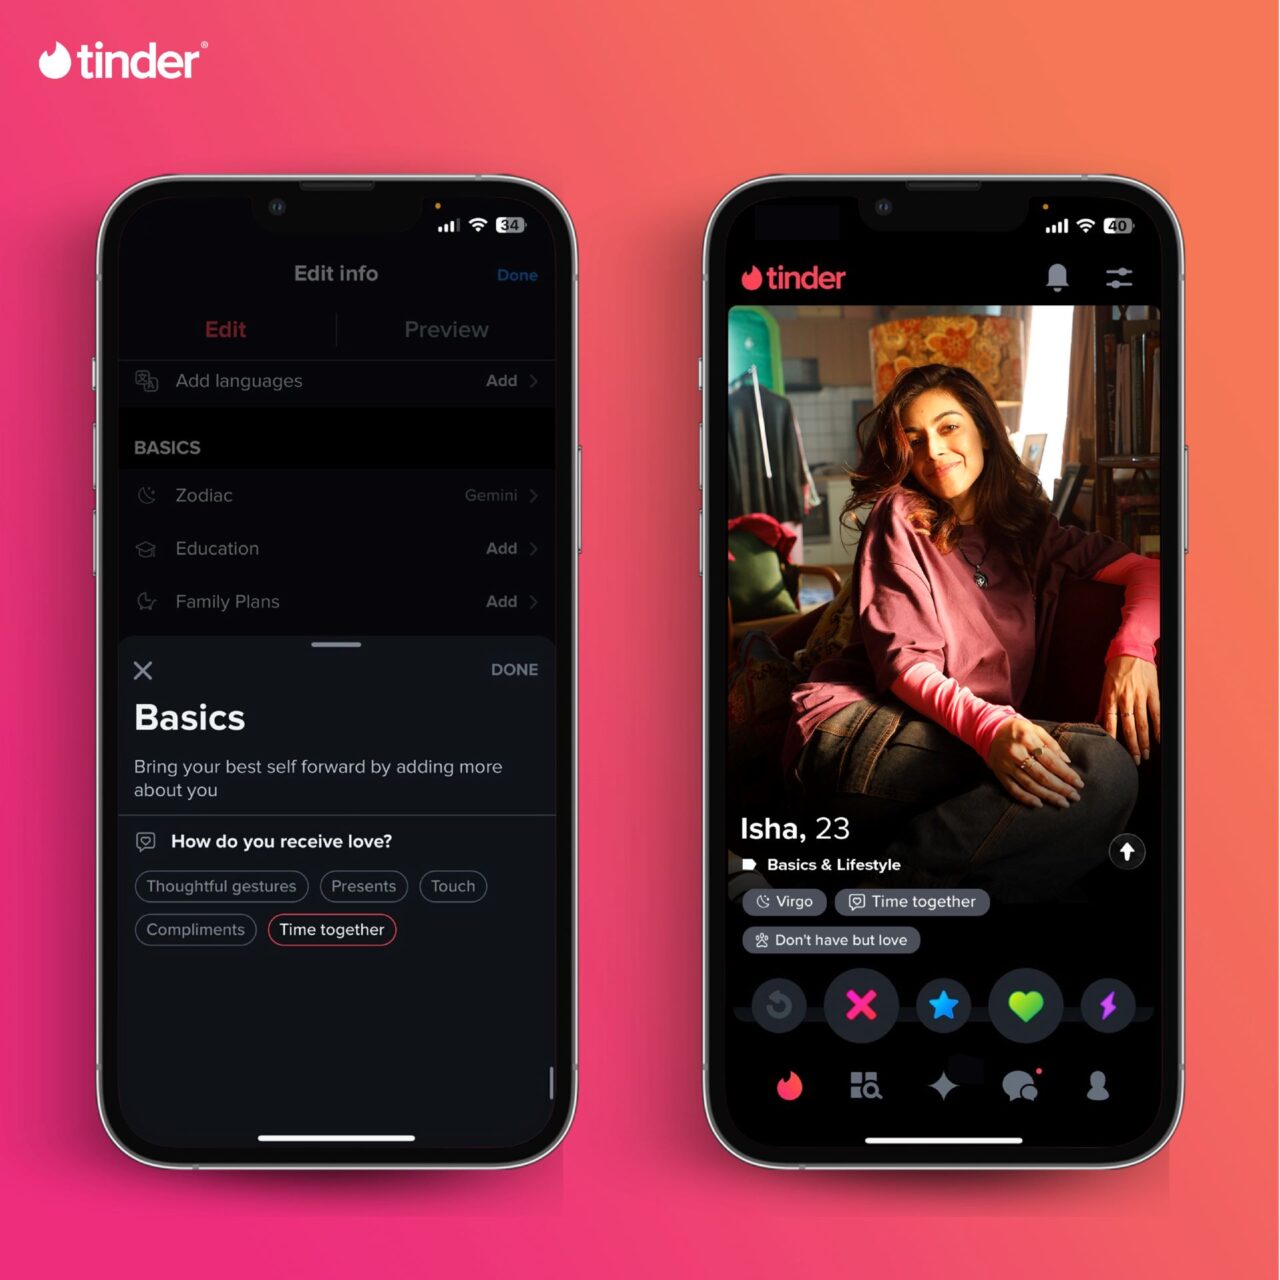 Tinder Launches "Love Style" Feature to Enhance User Connections